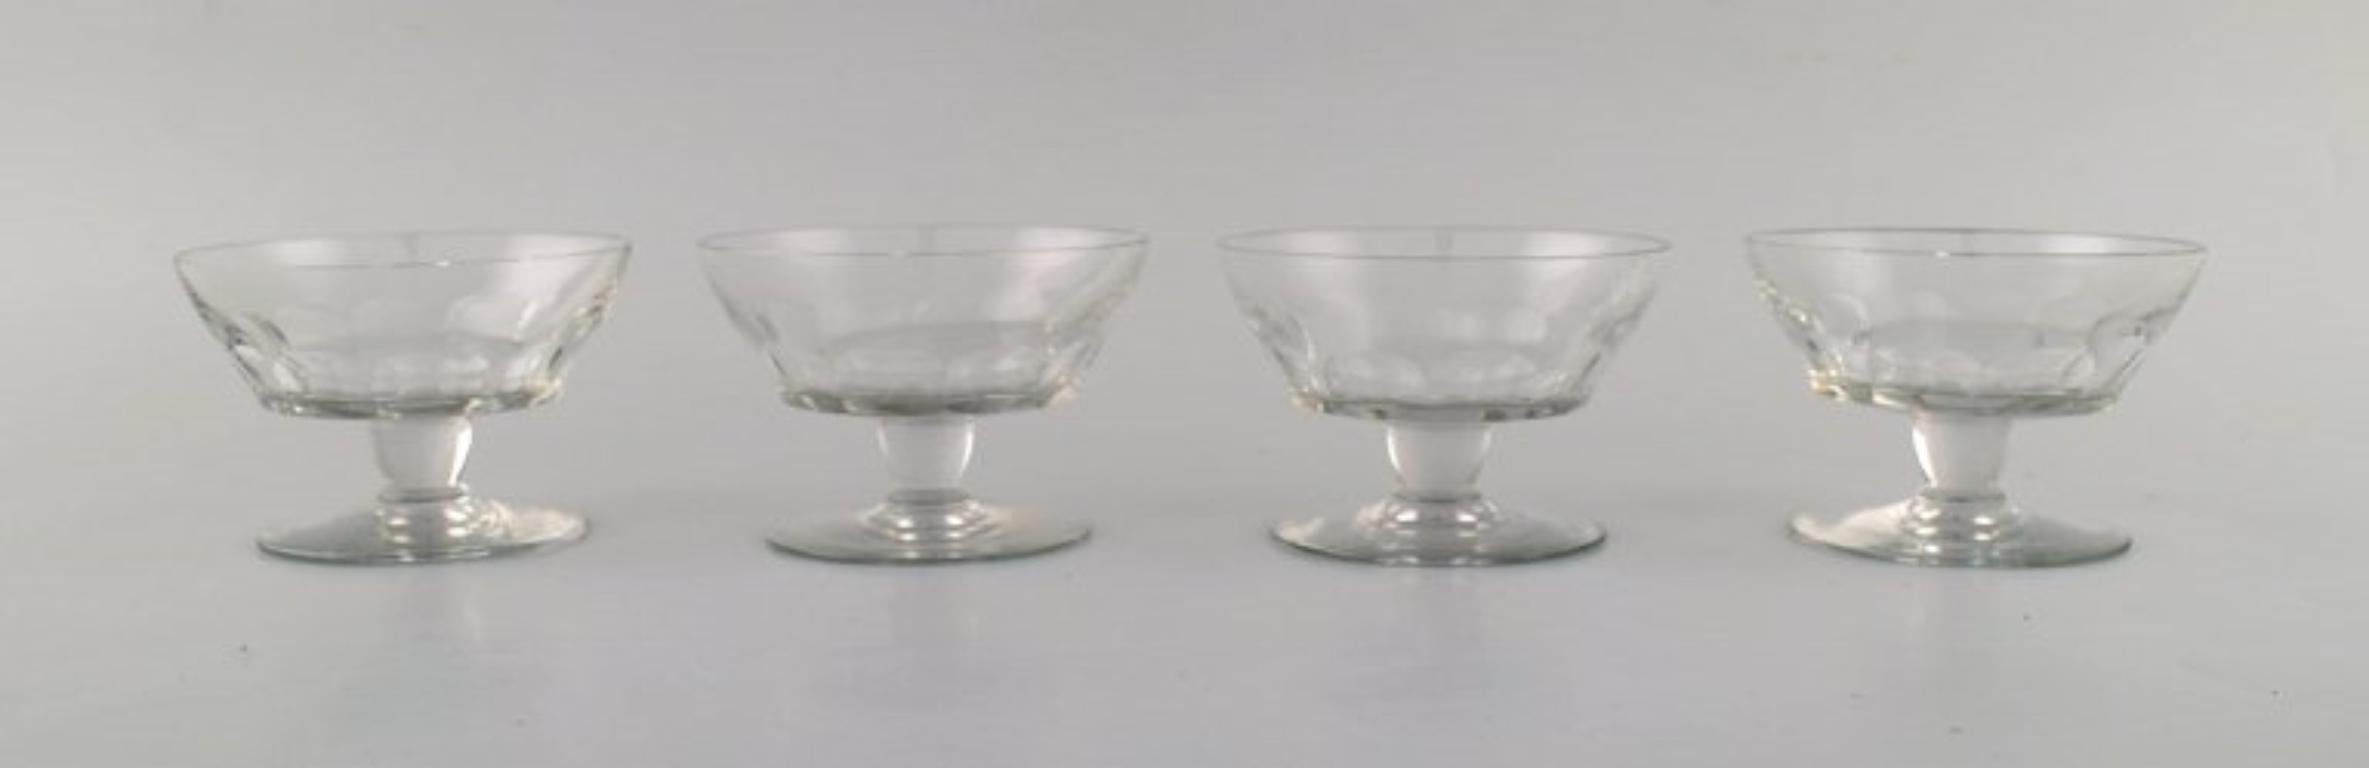 Baccarat, France. Ten facet-cut Art Deco glasses. 
Art glass, 1930 / 40's.
Measures: 9.5 x 6.5 cm.
In very good condition.
Stamped.